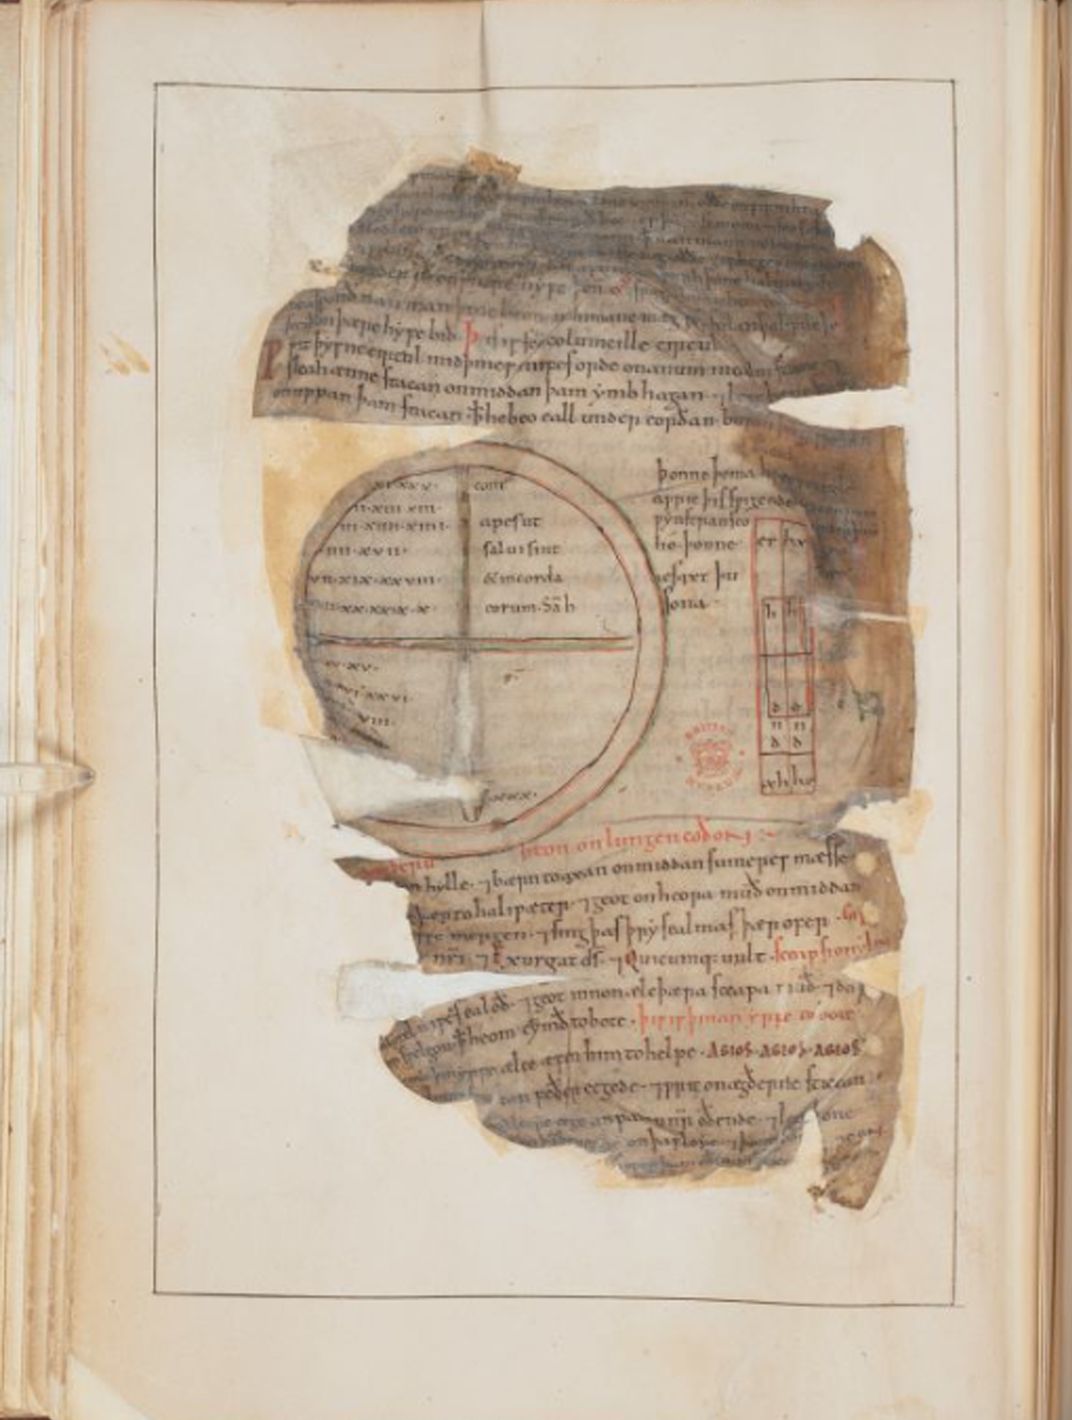 Instructions for making a magical device known as Saint Columcille's Circle, used to protect bees and keep them in an enclosure, in an 11th-century English psalter